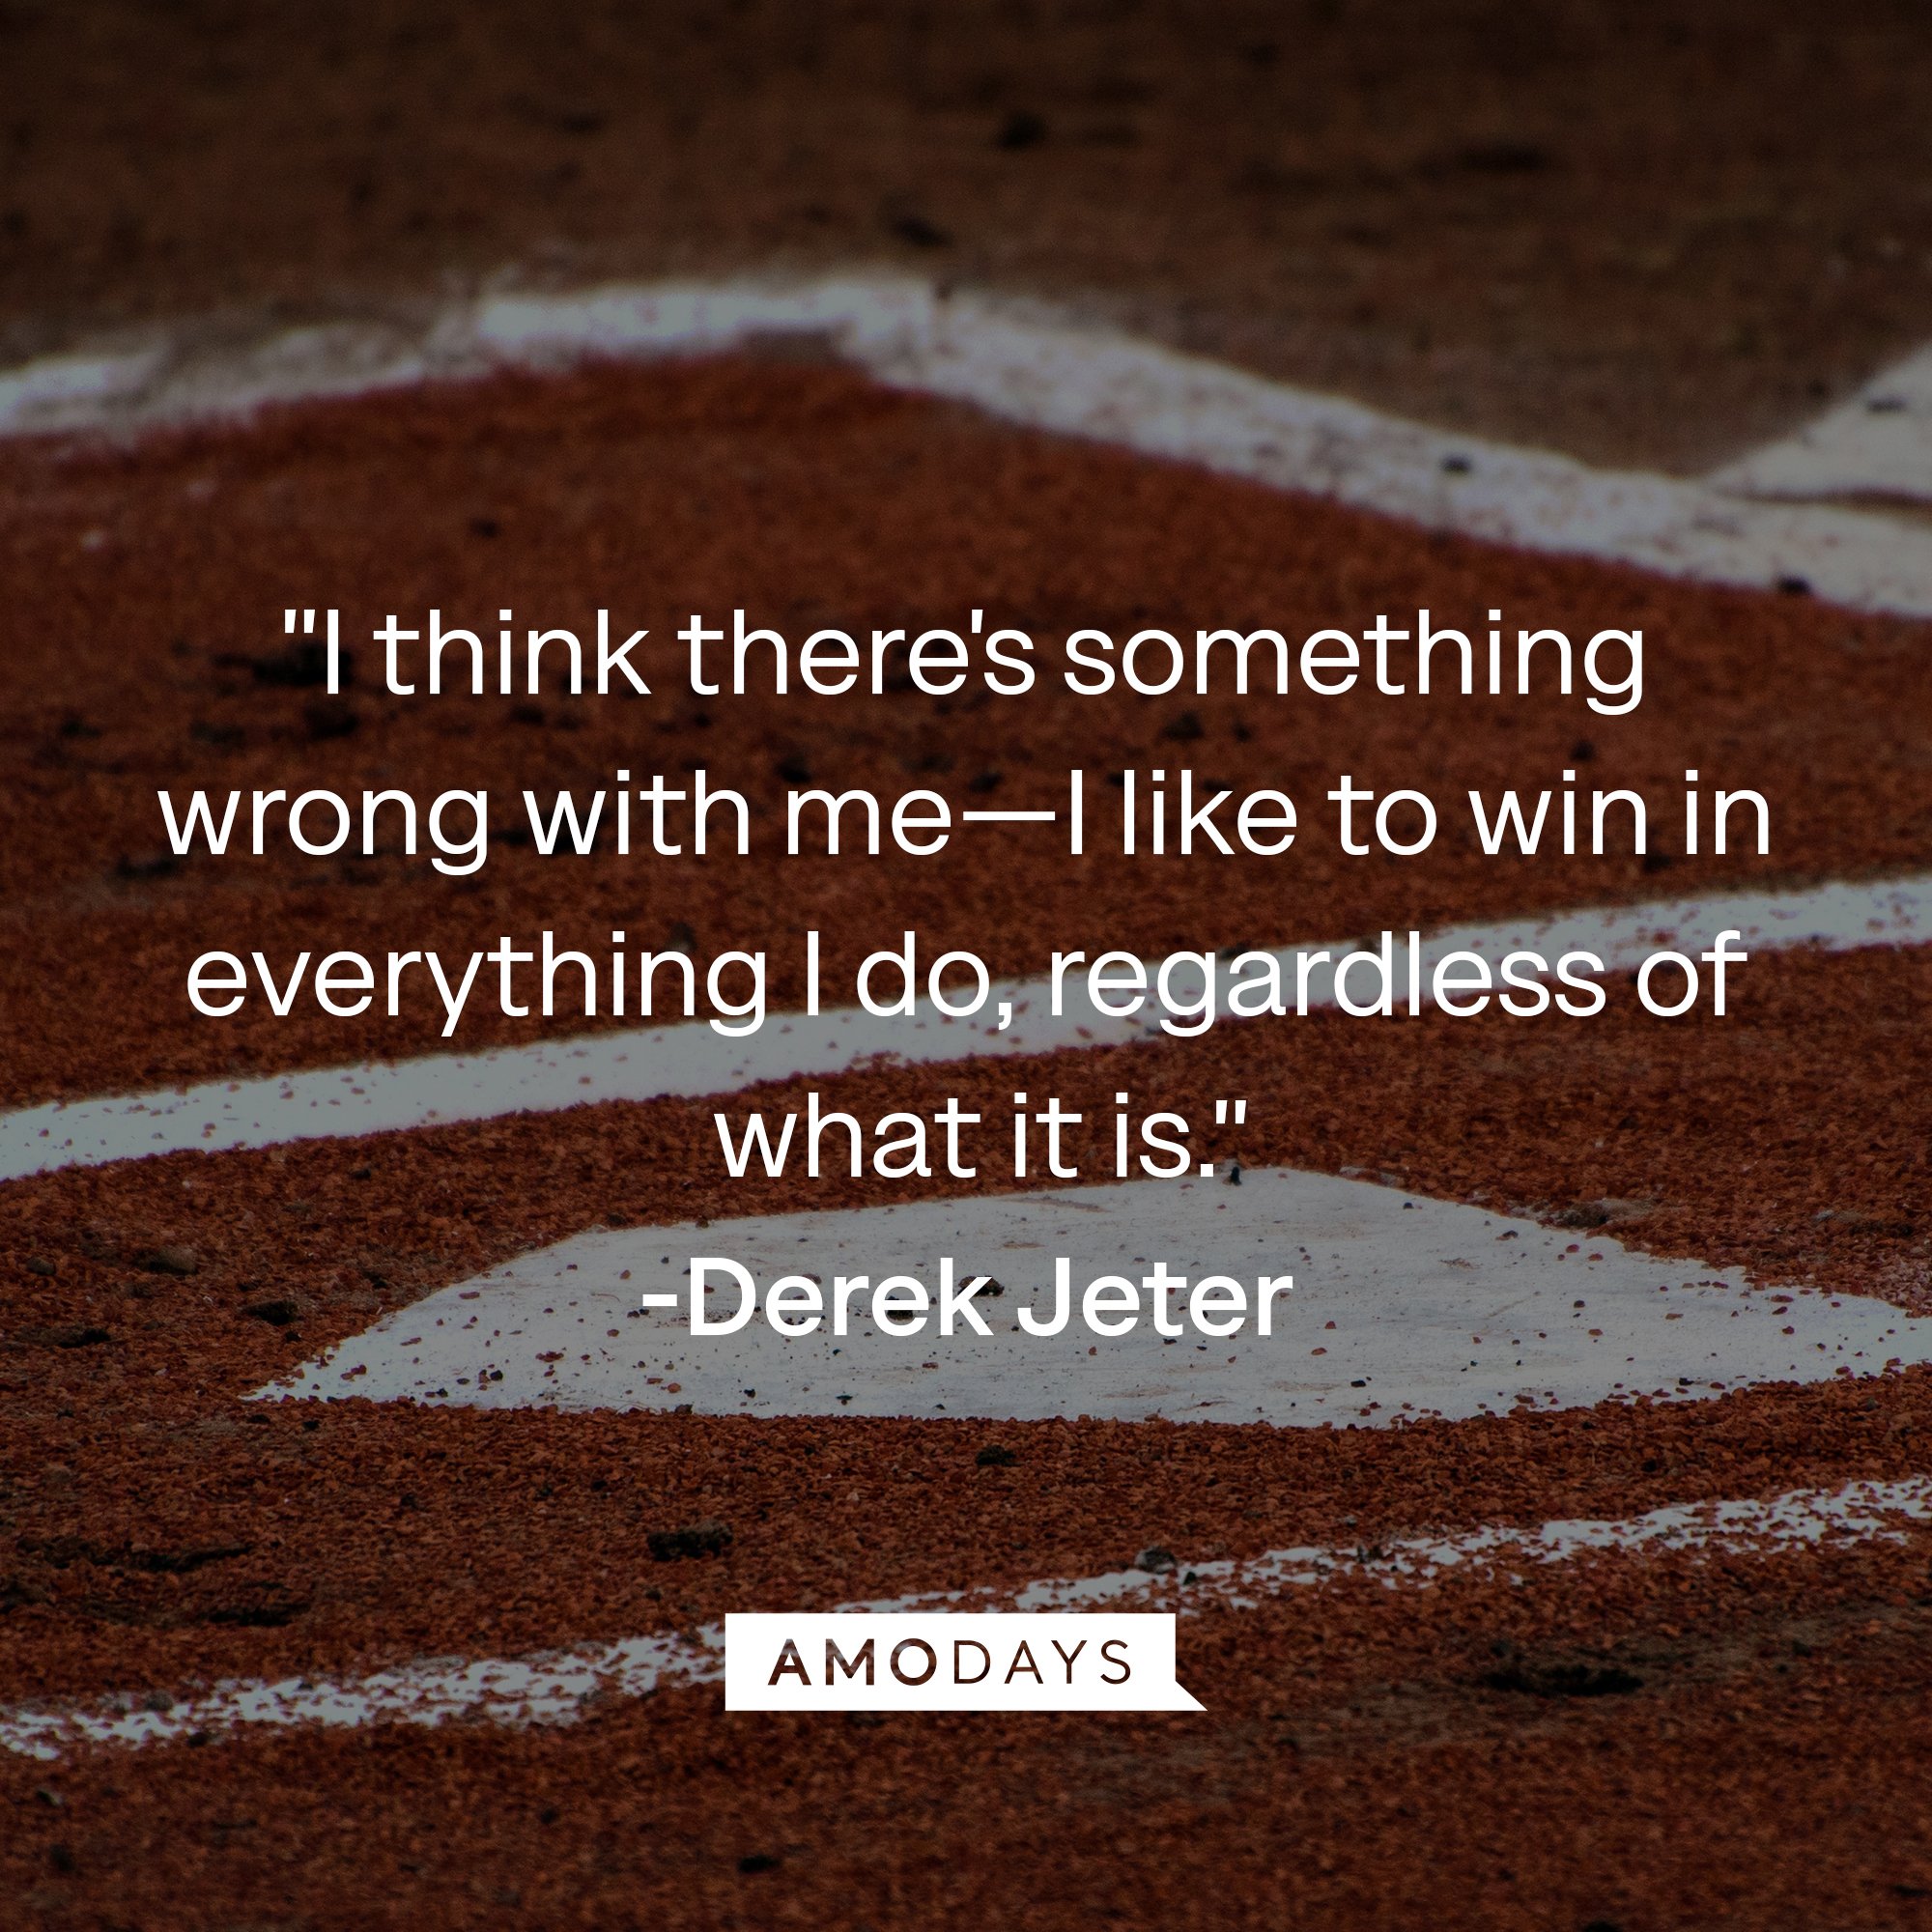 Derek Jeter's quote: "I think there's something wrong with me—I like to win in everything I do, regardless of what it is." | Image: AmoDays